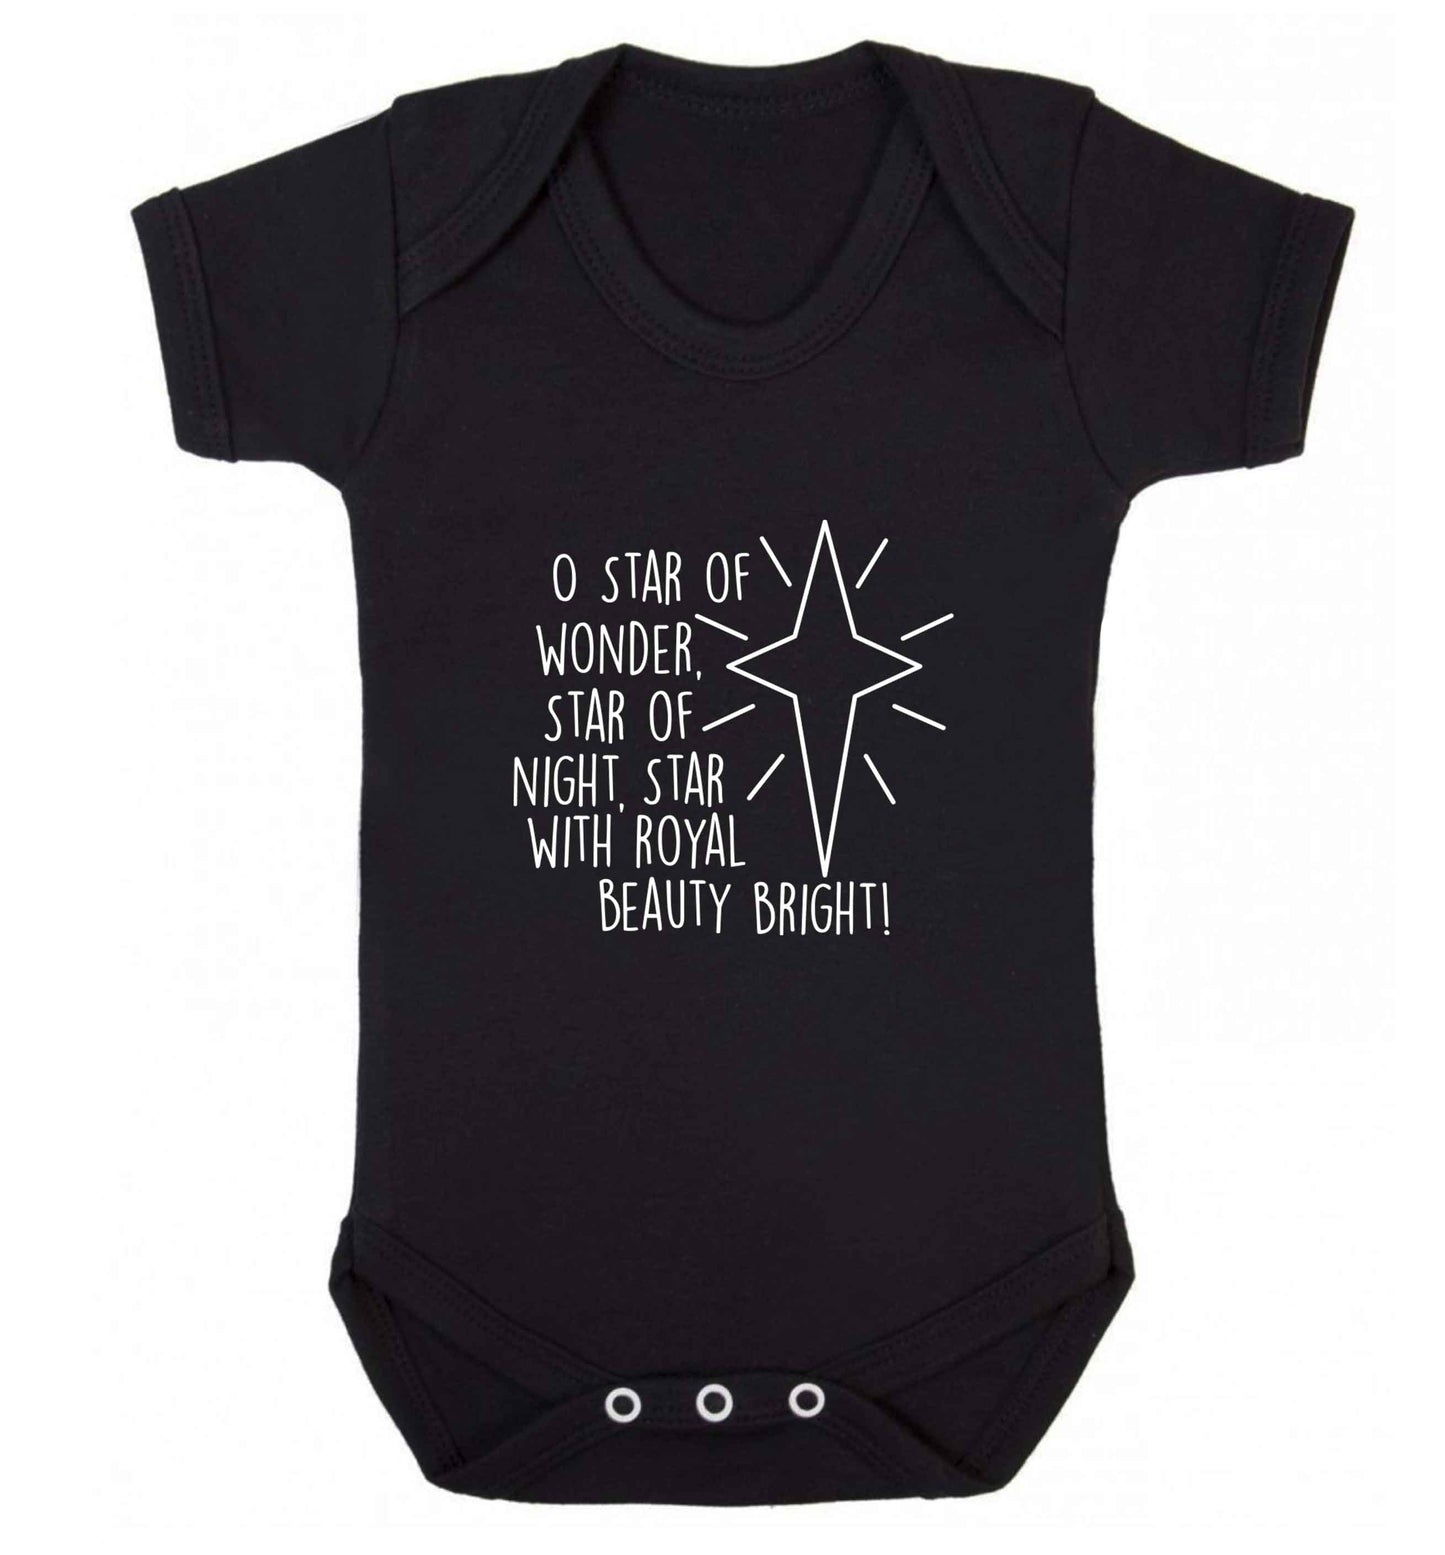 Oh star of wonder star of night, star with royal beauty bright baby vest black 18-24 months